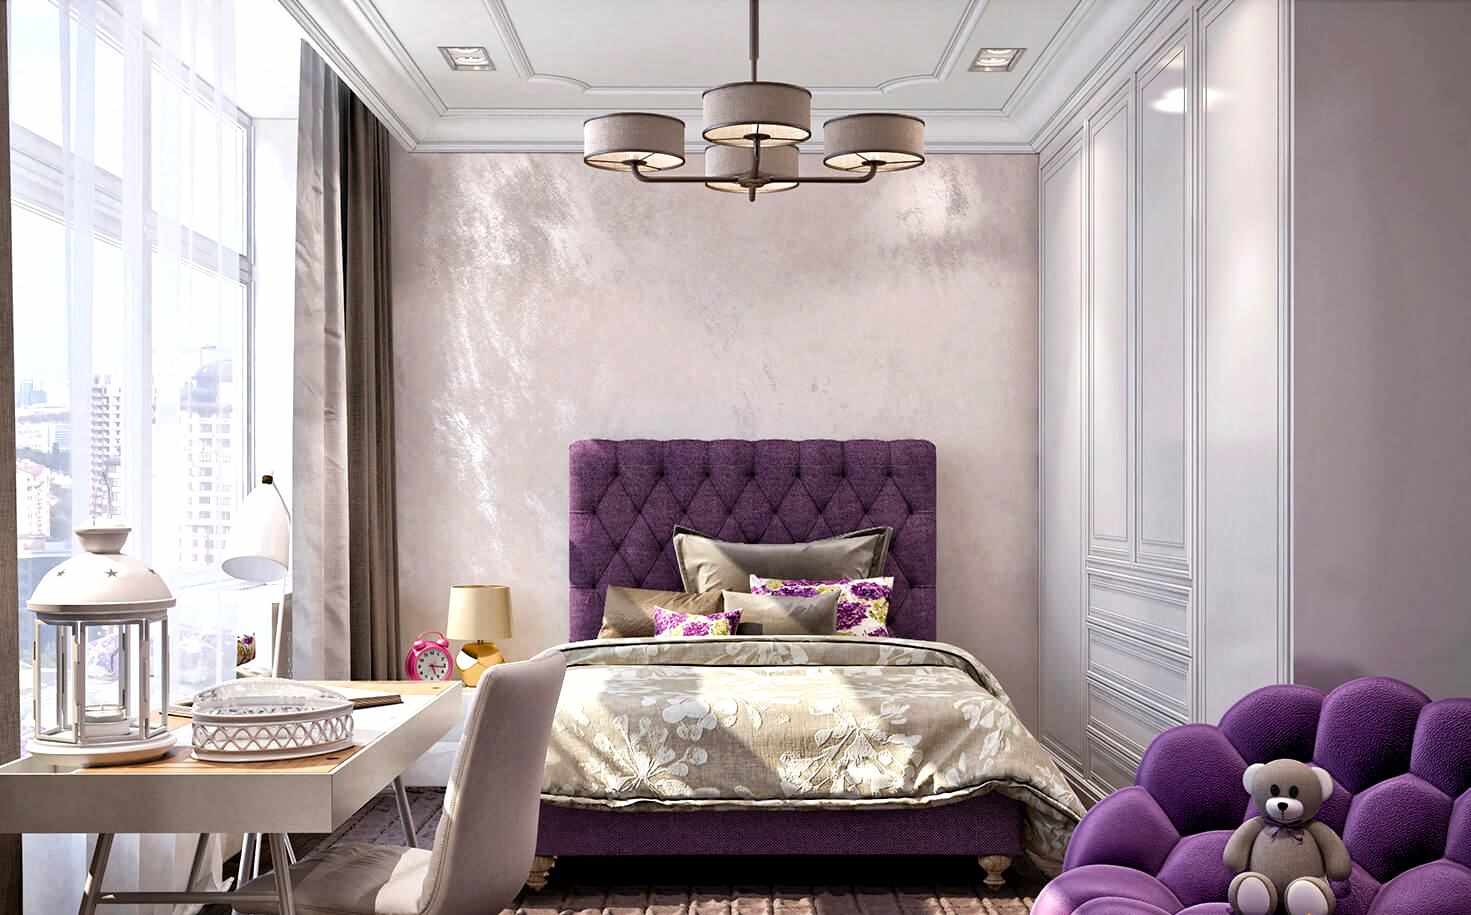 lilac bedroom options